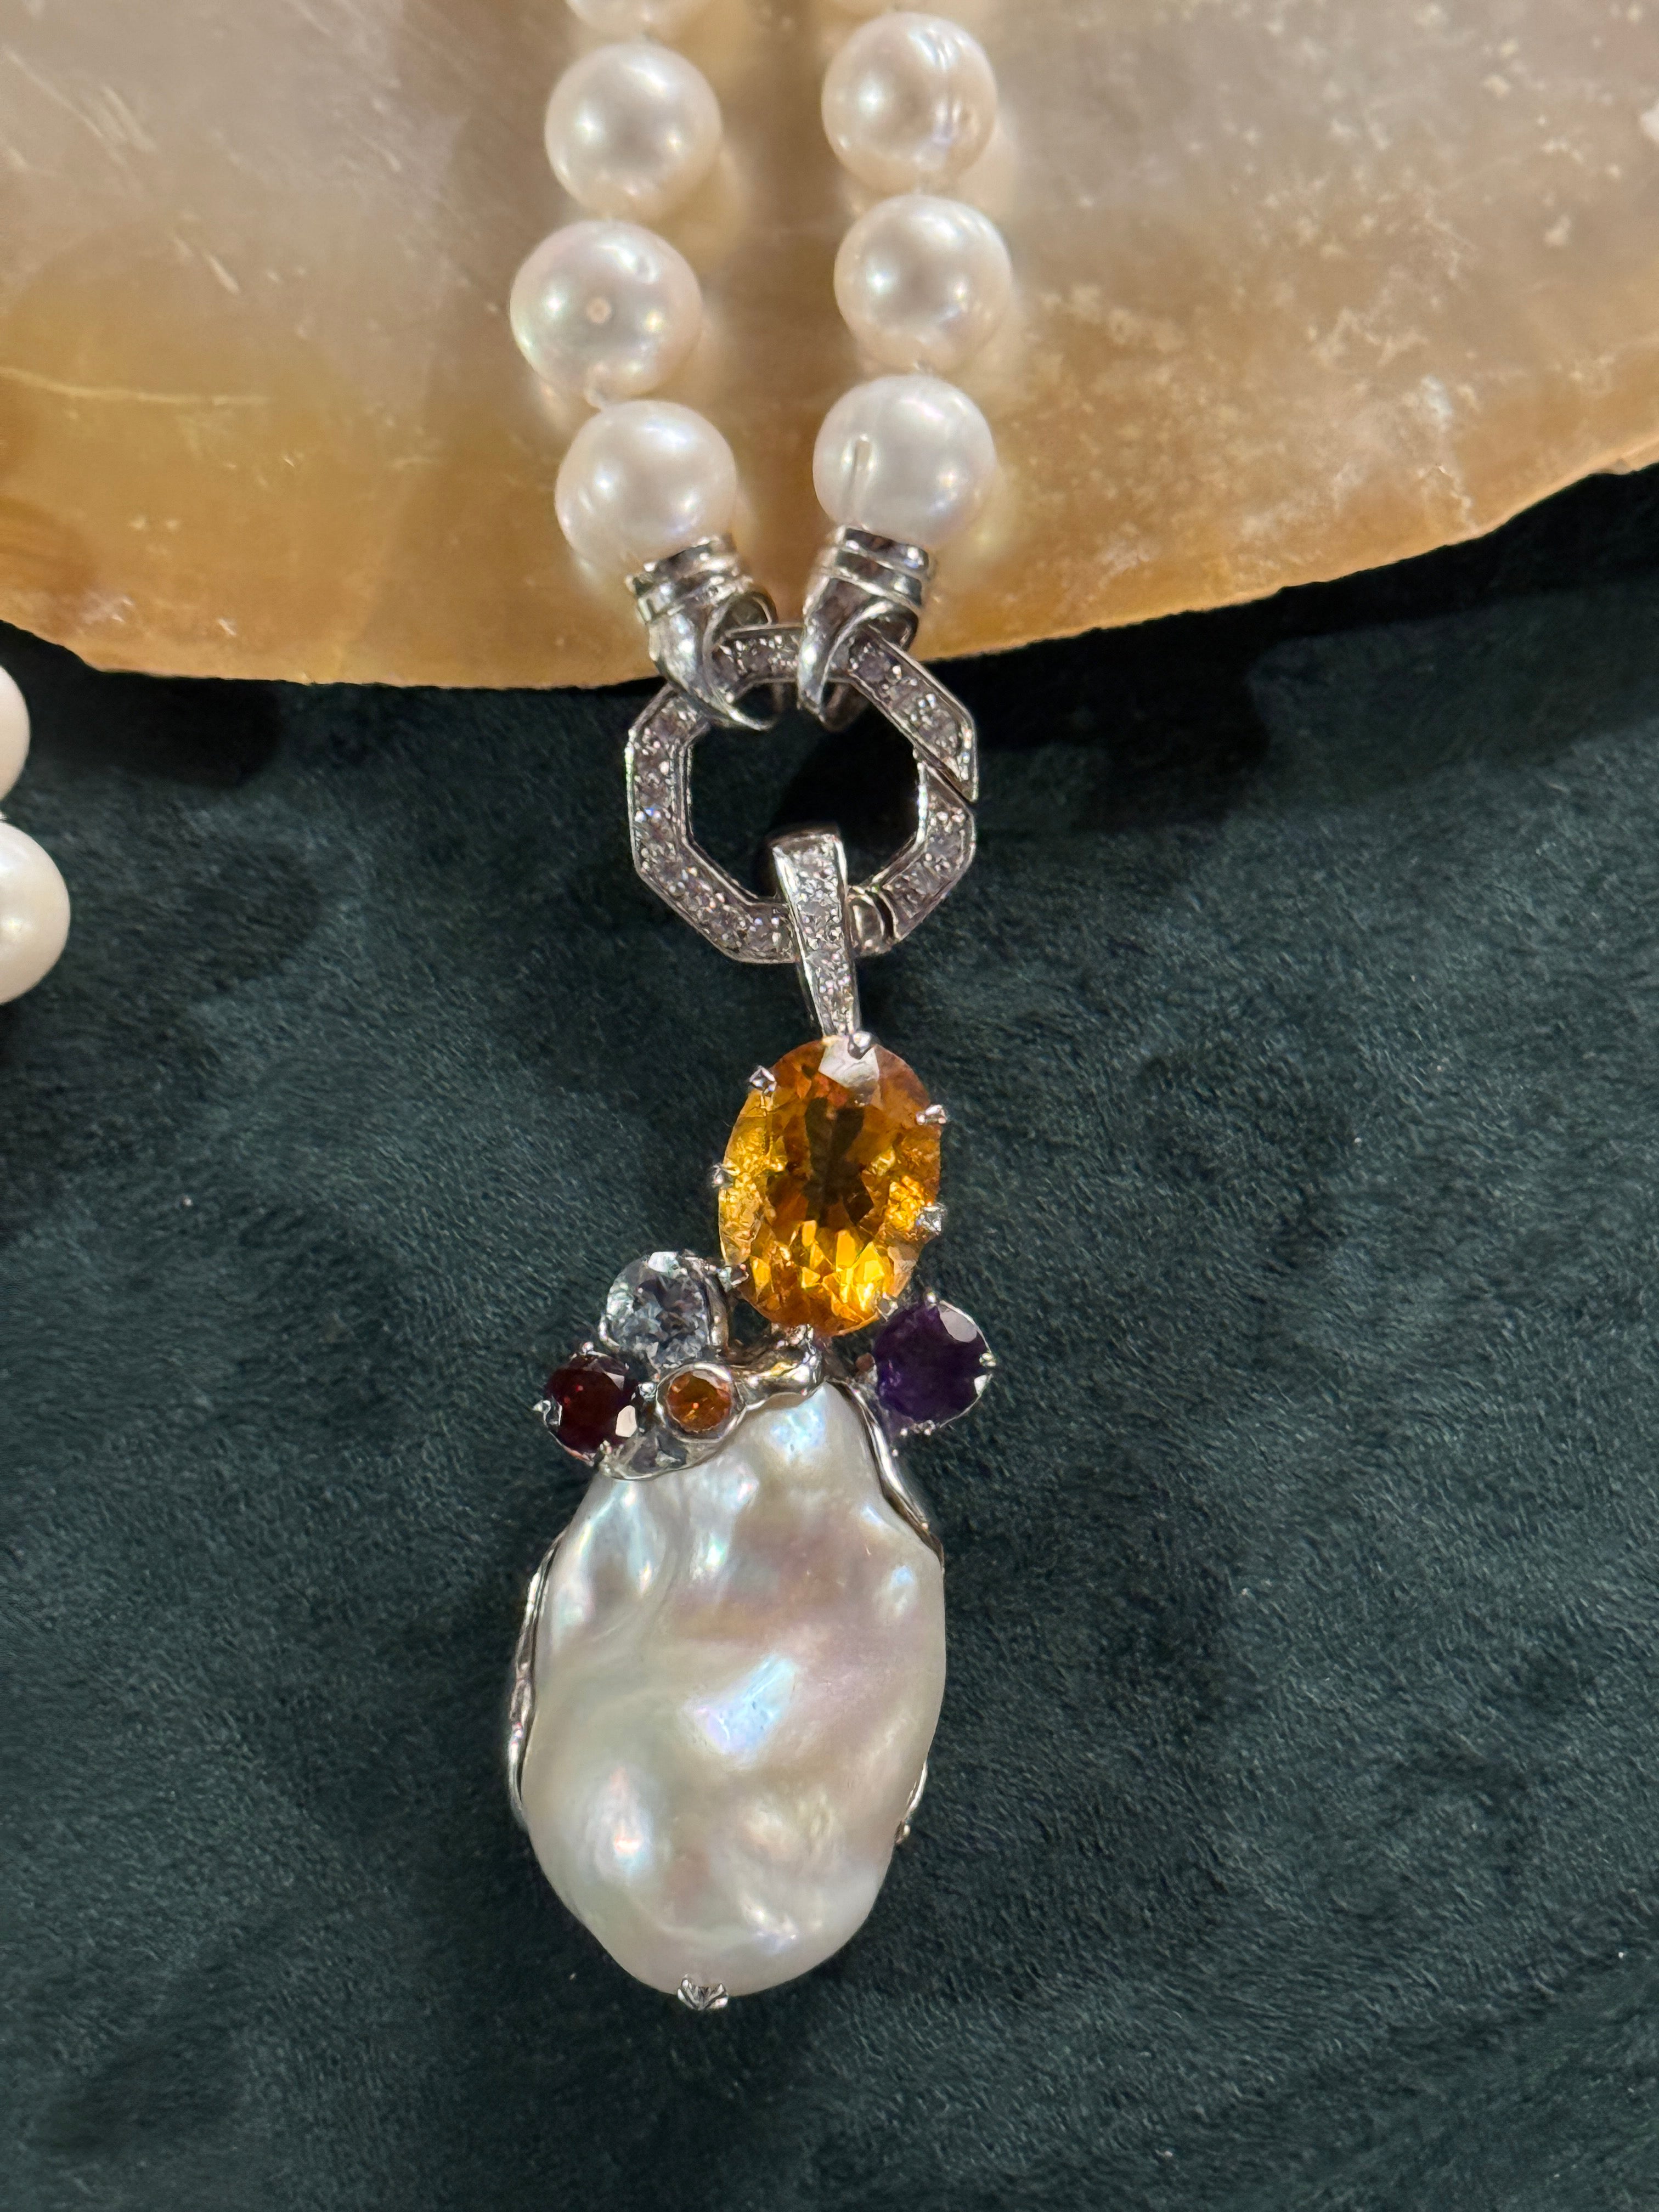 Classic Pearl Necklace With Baroque Pendant.